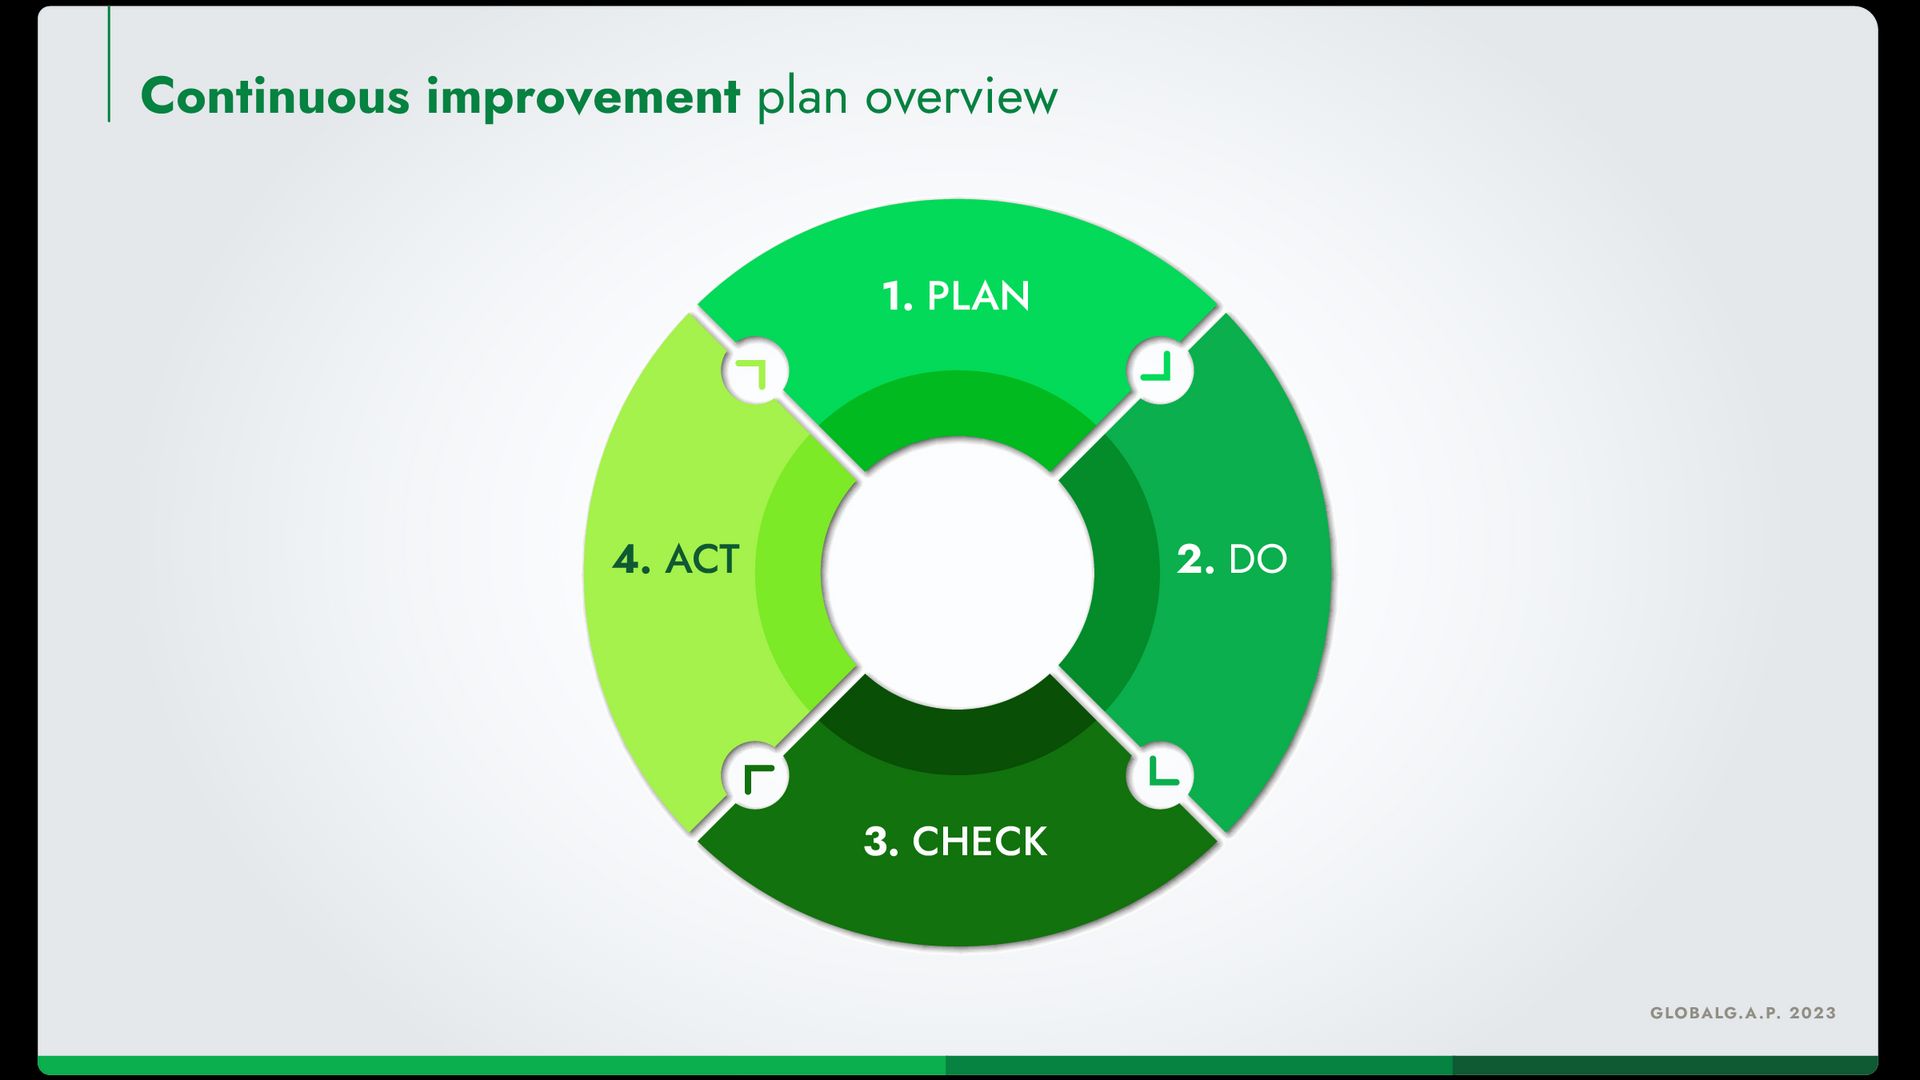 Infographic showing the four stages of the Integrated Farm Assurance continuous improvement plan at farm level